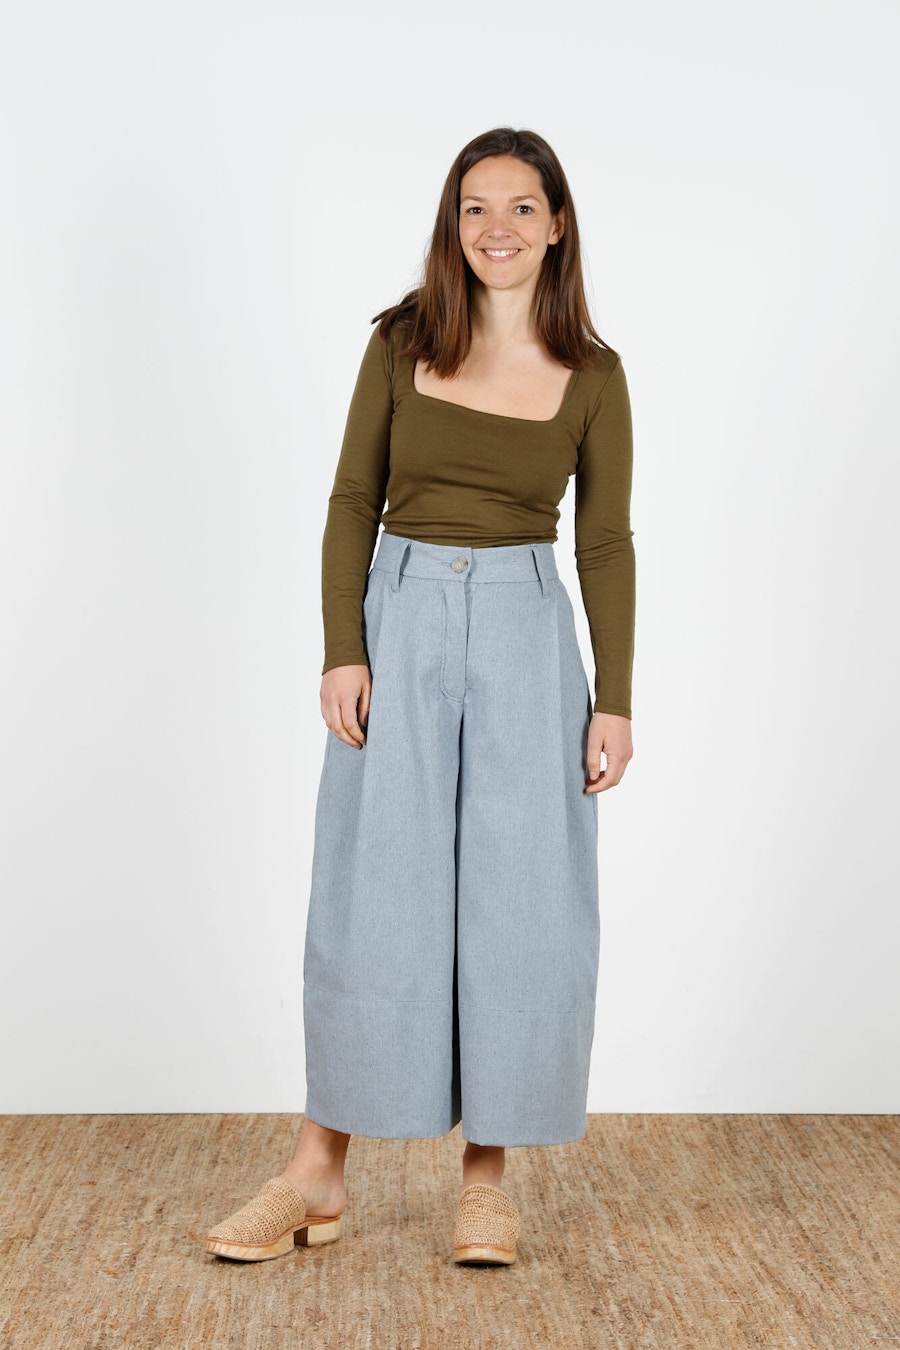 Front Olive ZQ Upcycled Cotton Twill Birgitta Helmersson Block Pants The Fabric Store Blog